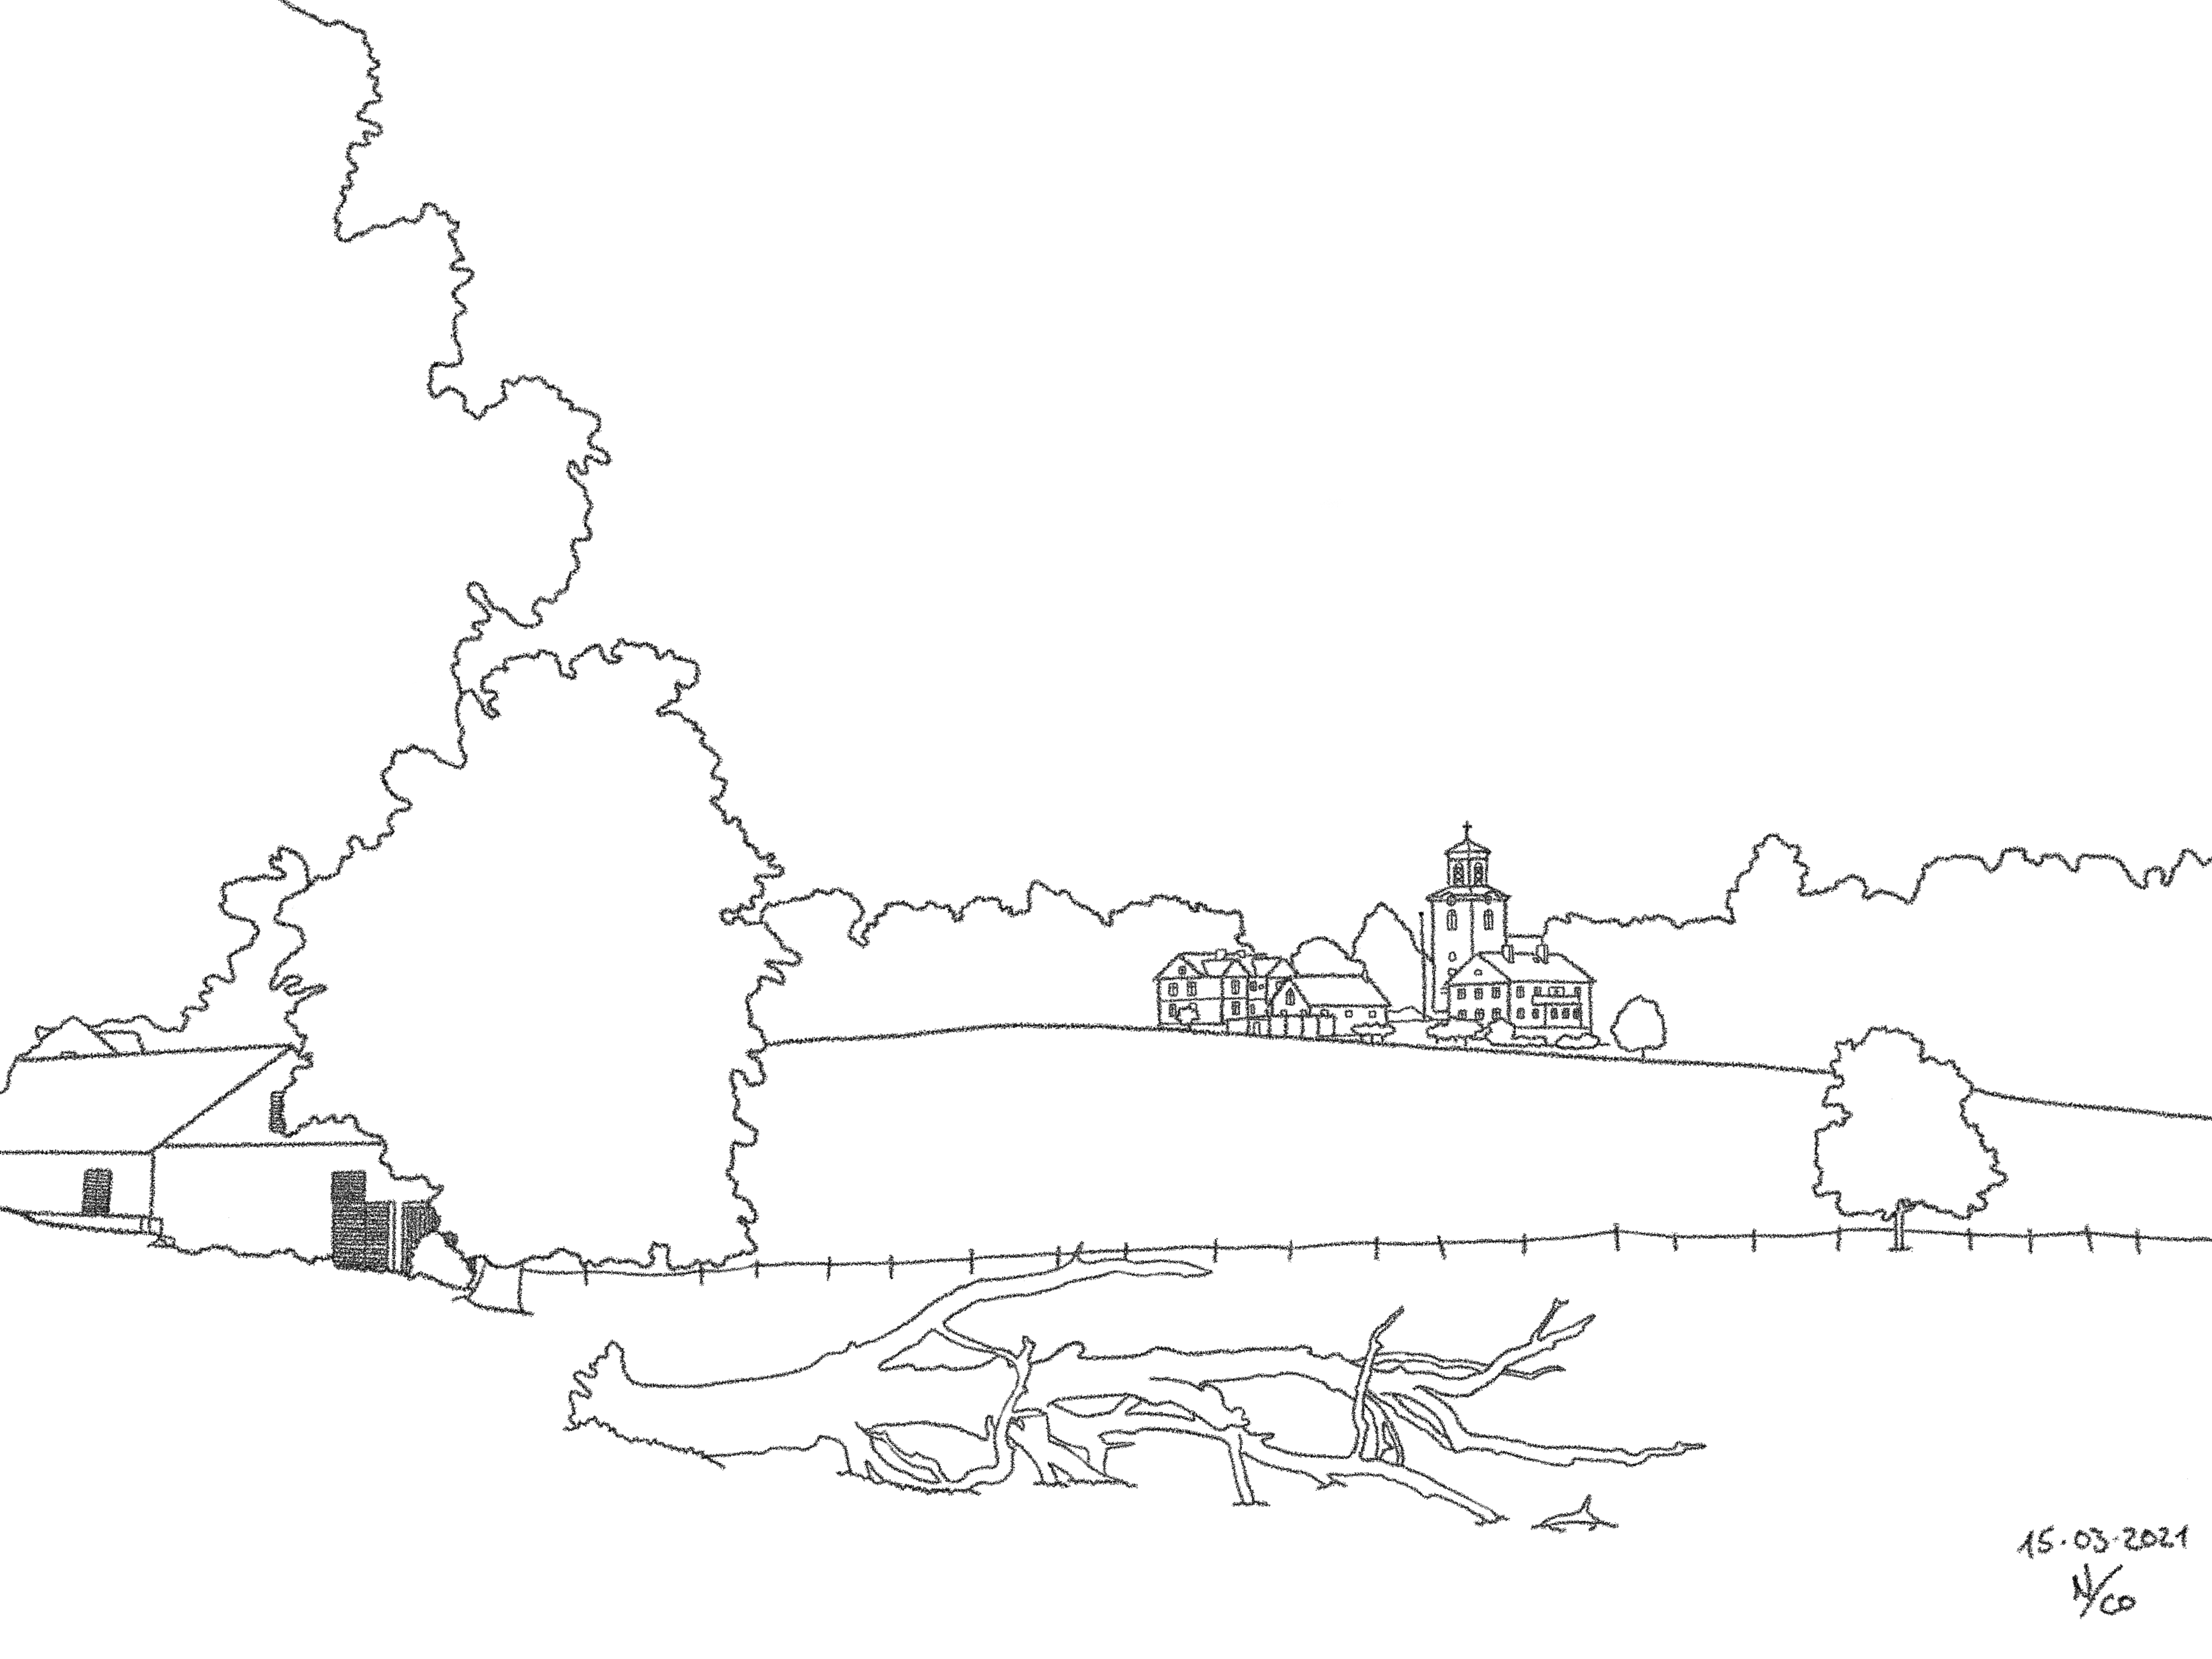 A drawing titled Resting Grounds, based on a photo taken in Småland.